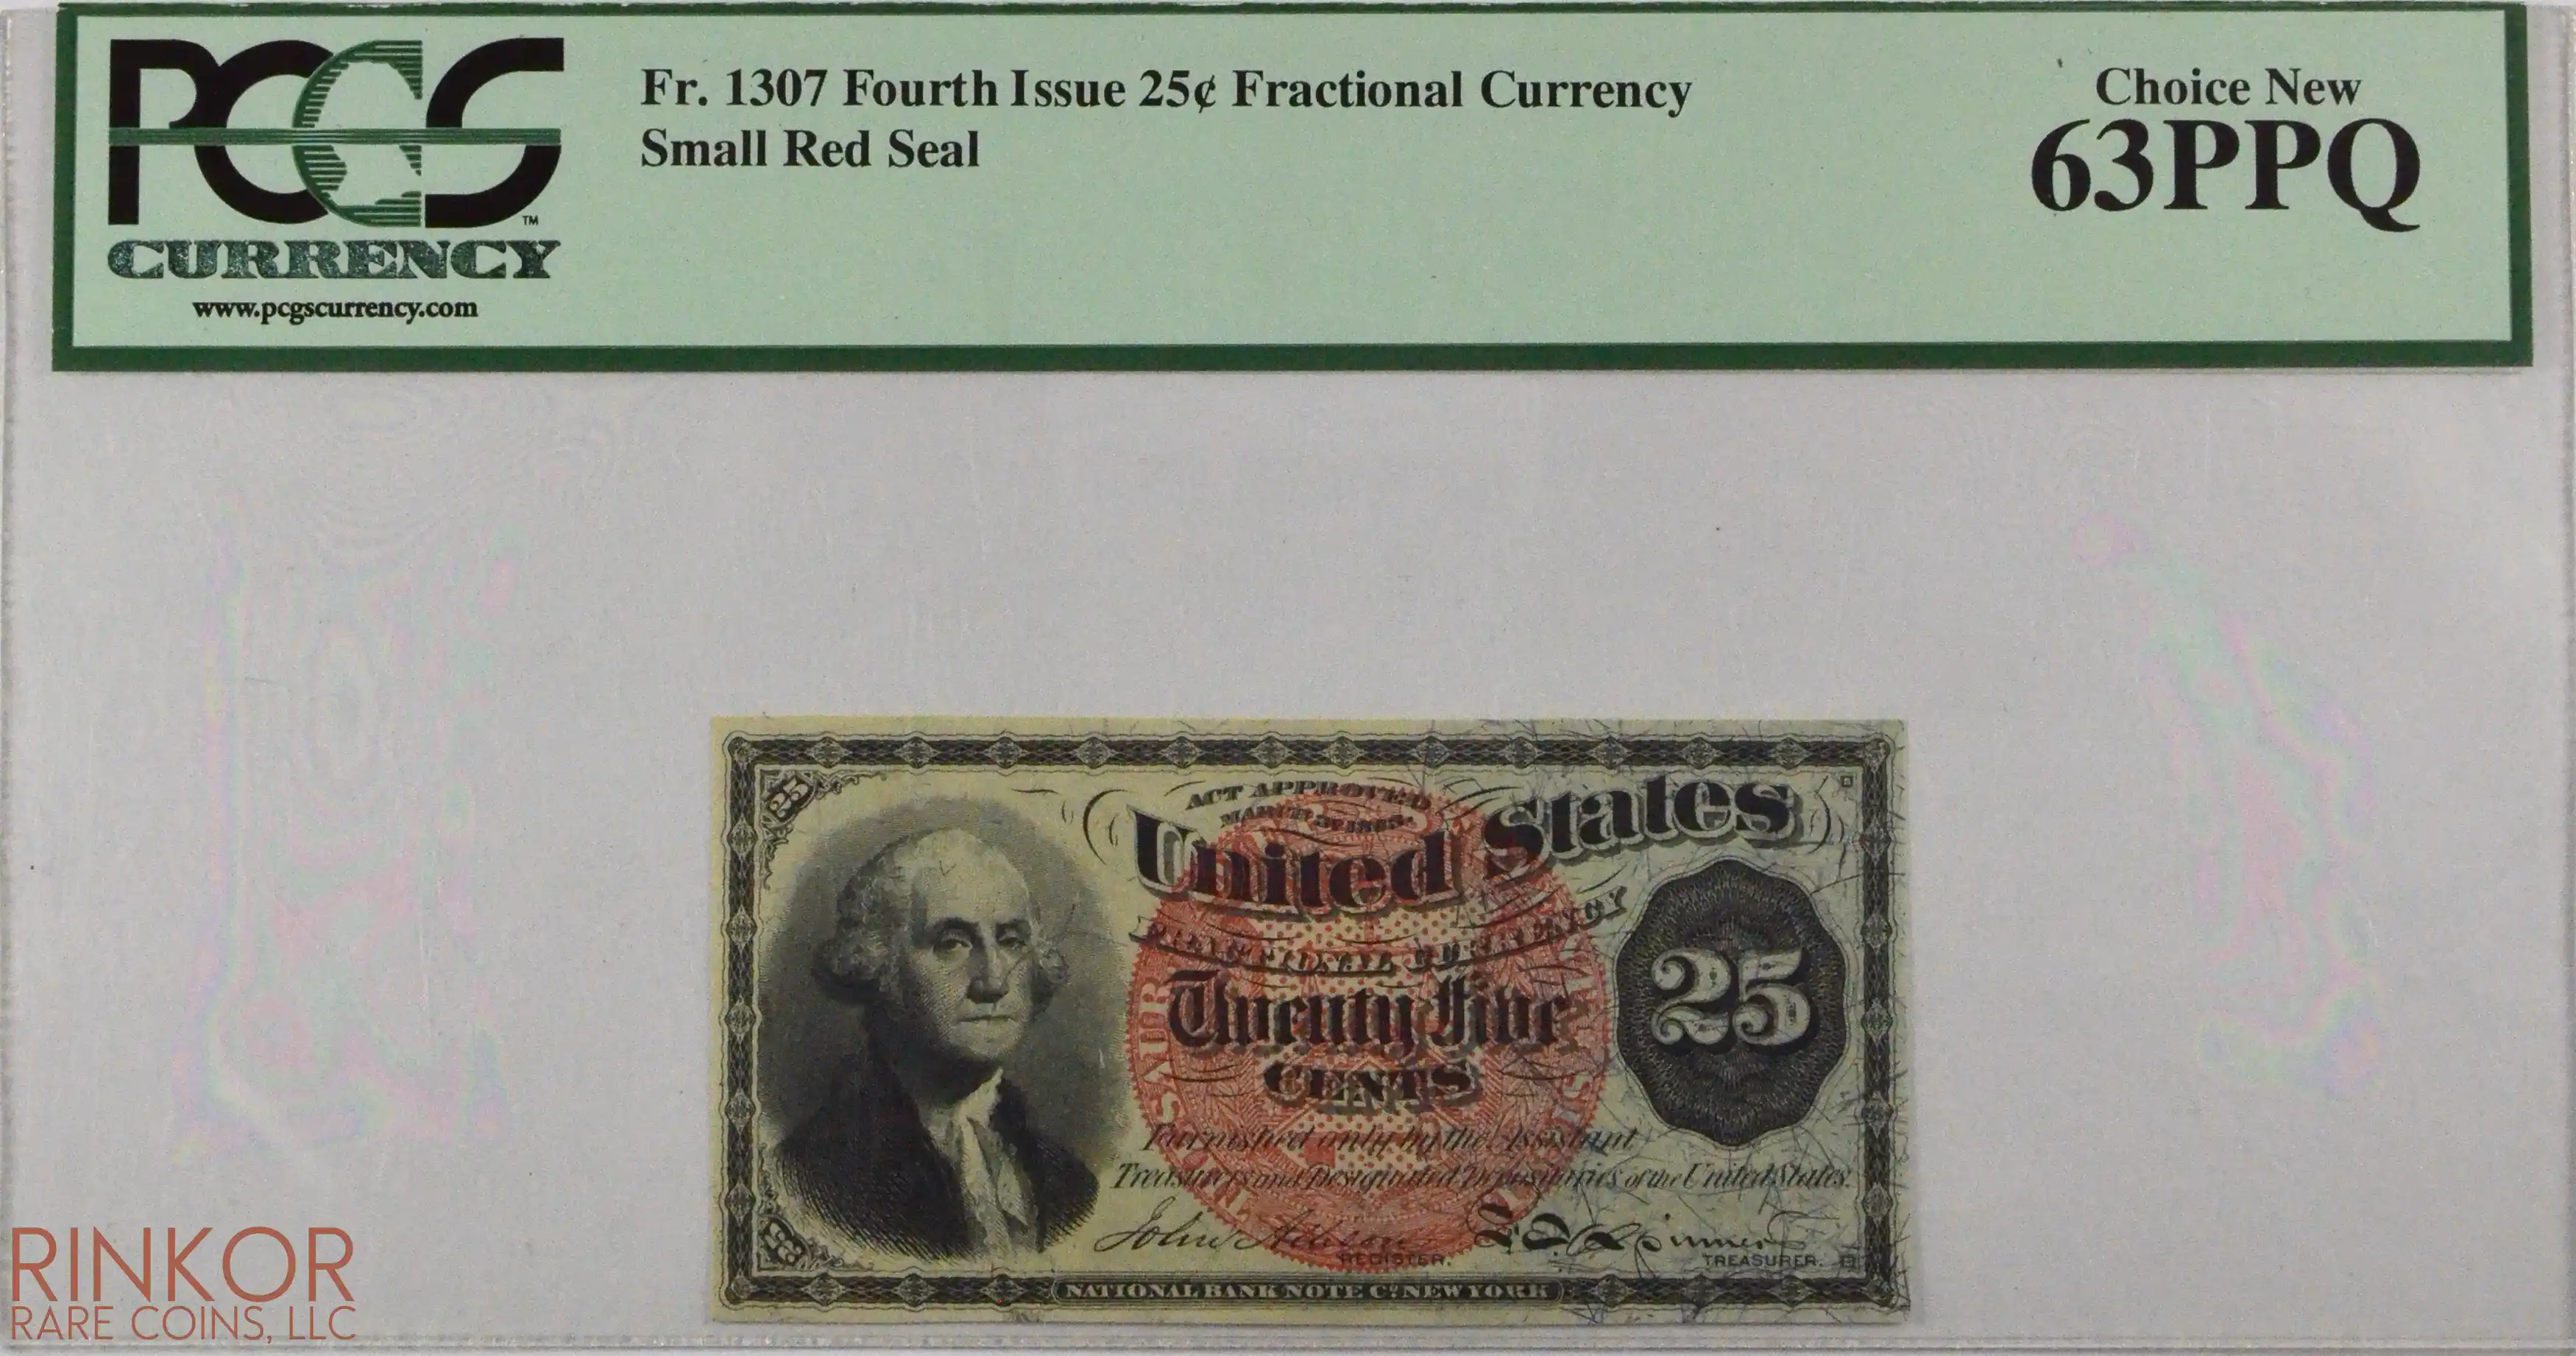 Fourth Issue 25 Cent Fr. 1307 Fractional Currency PCGS CU 63 PPQ